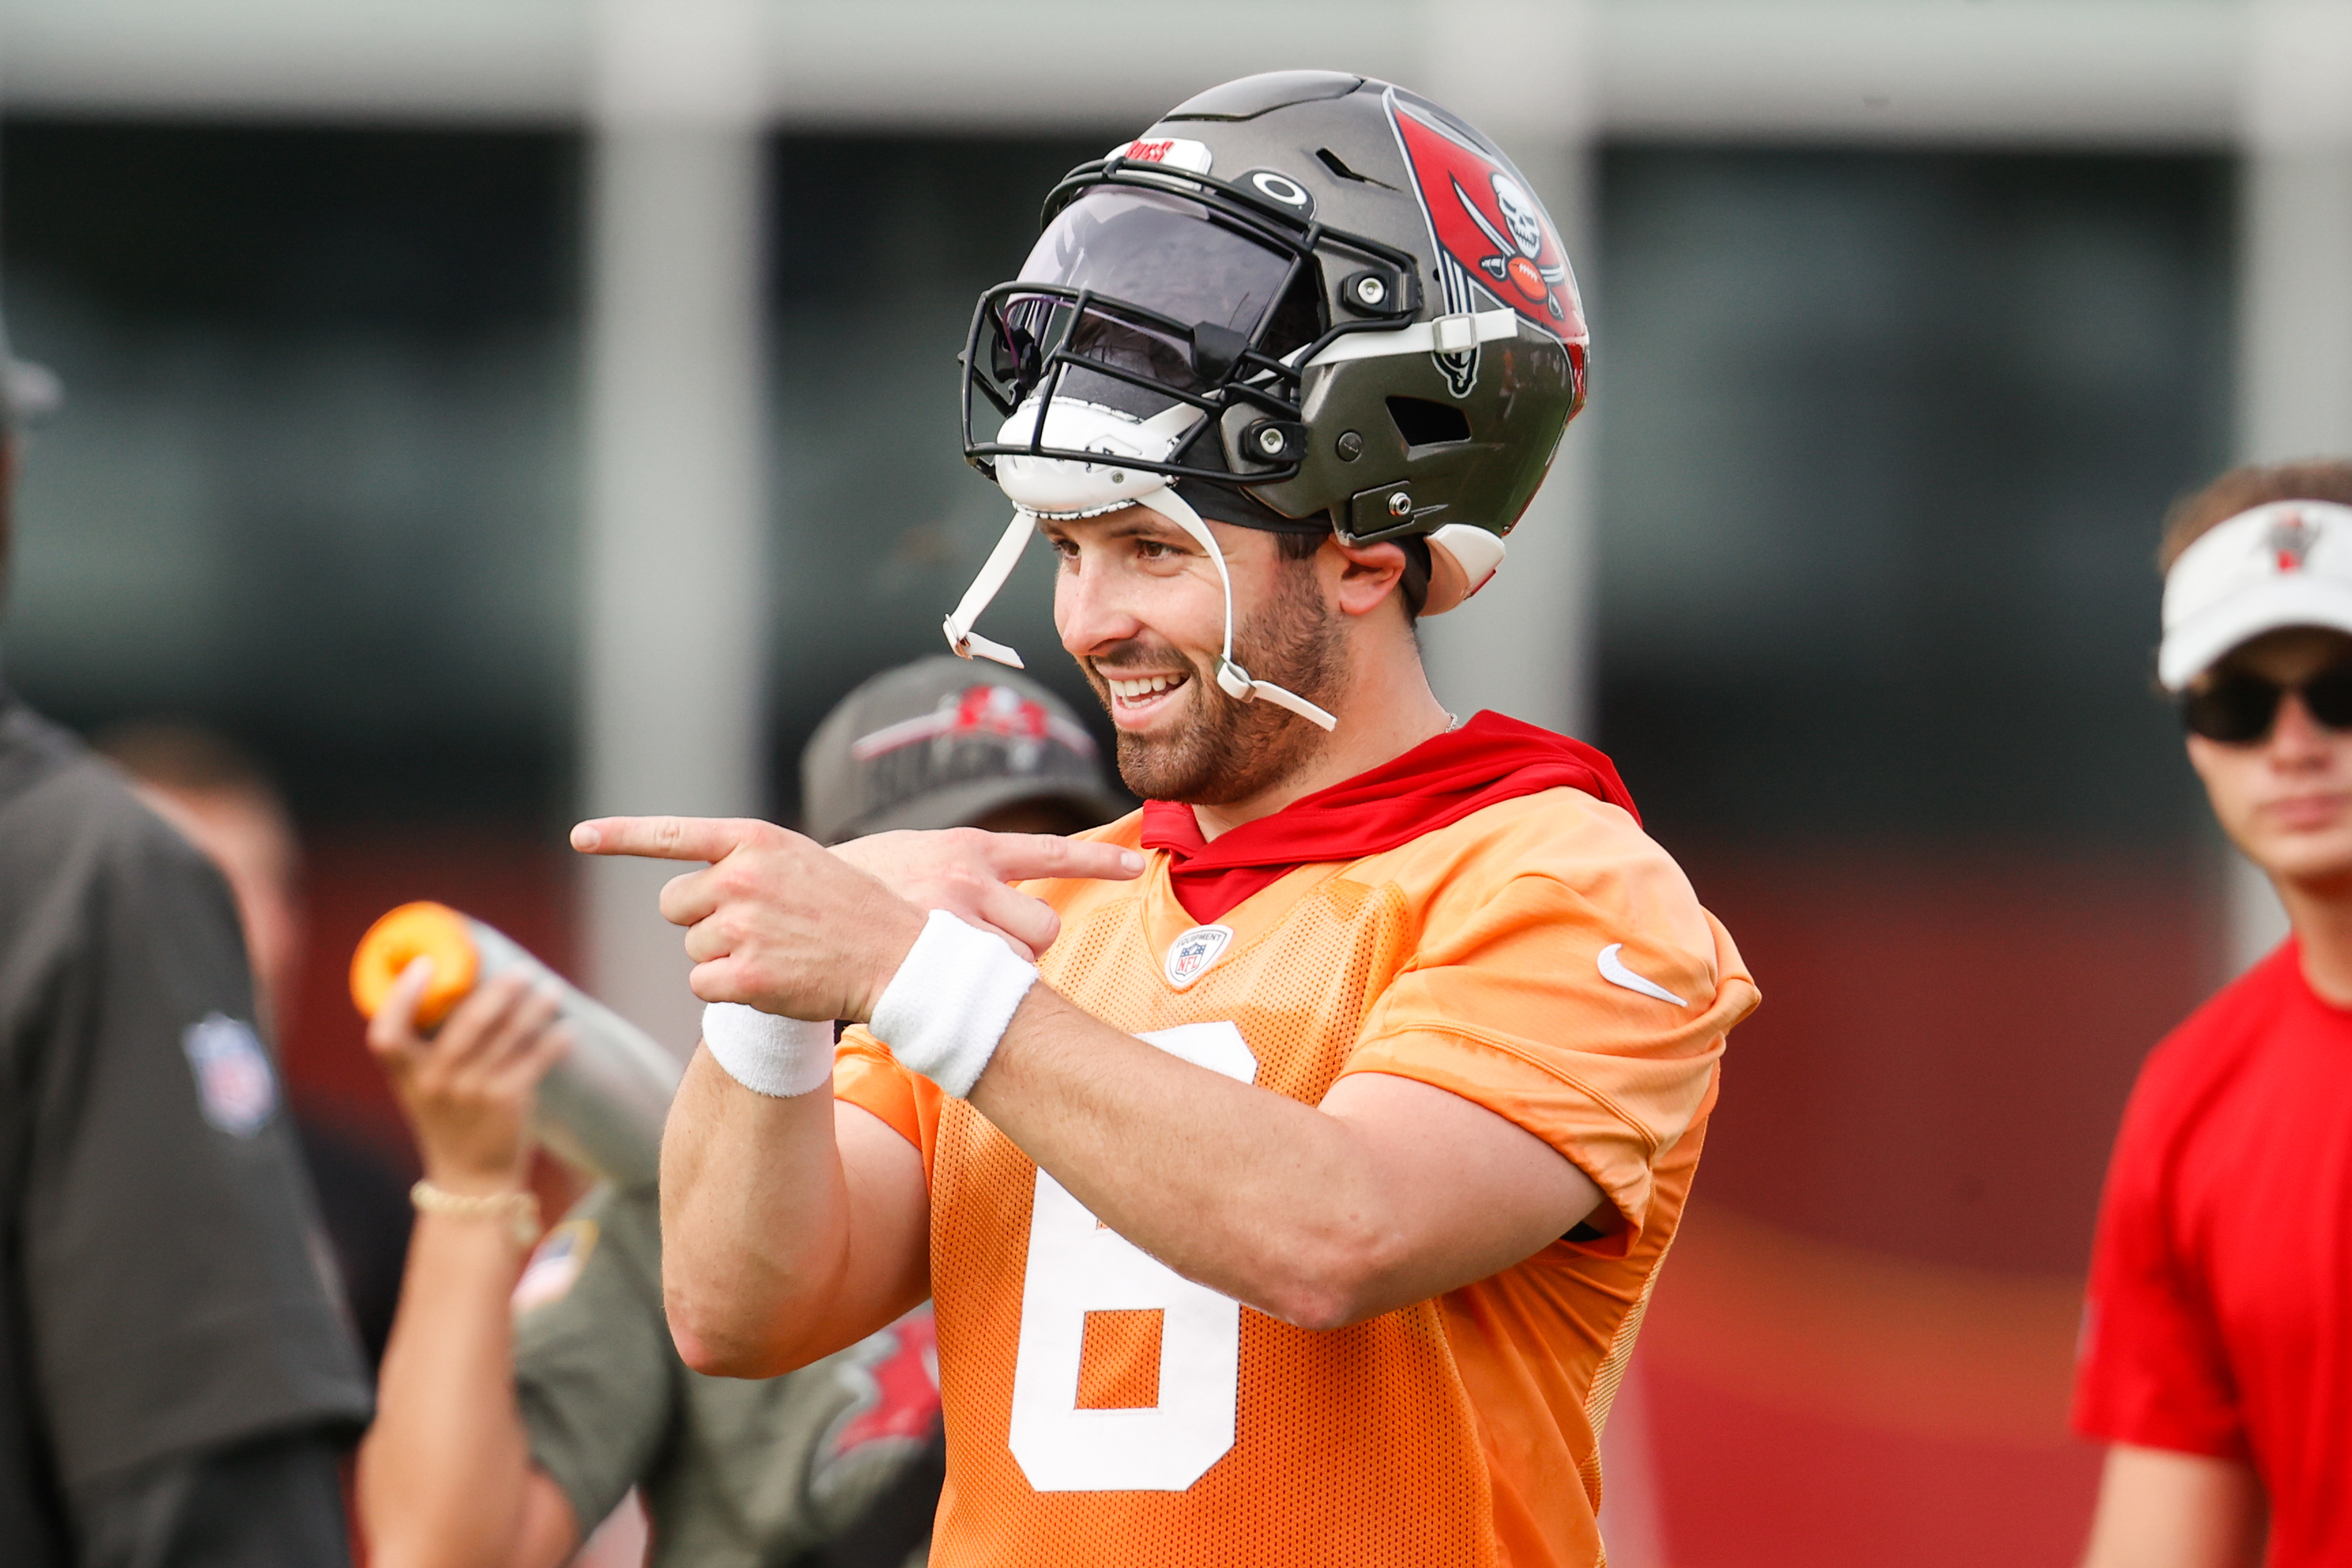 Buccaneers appear ready to roll out Kyle Trask at QB